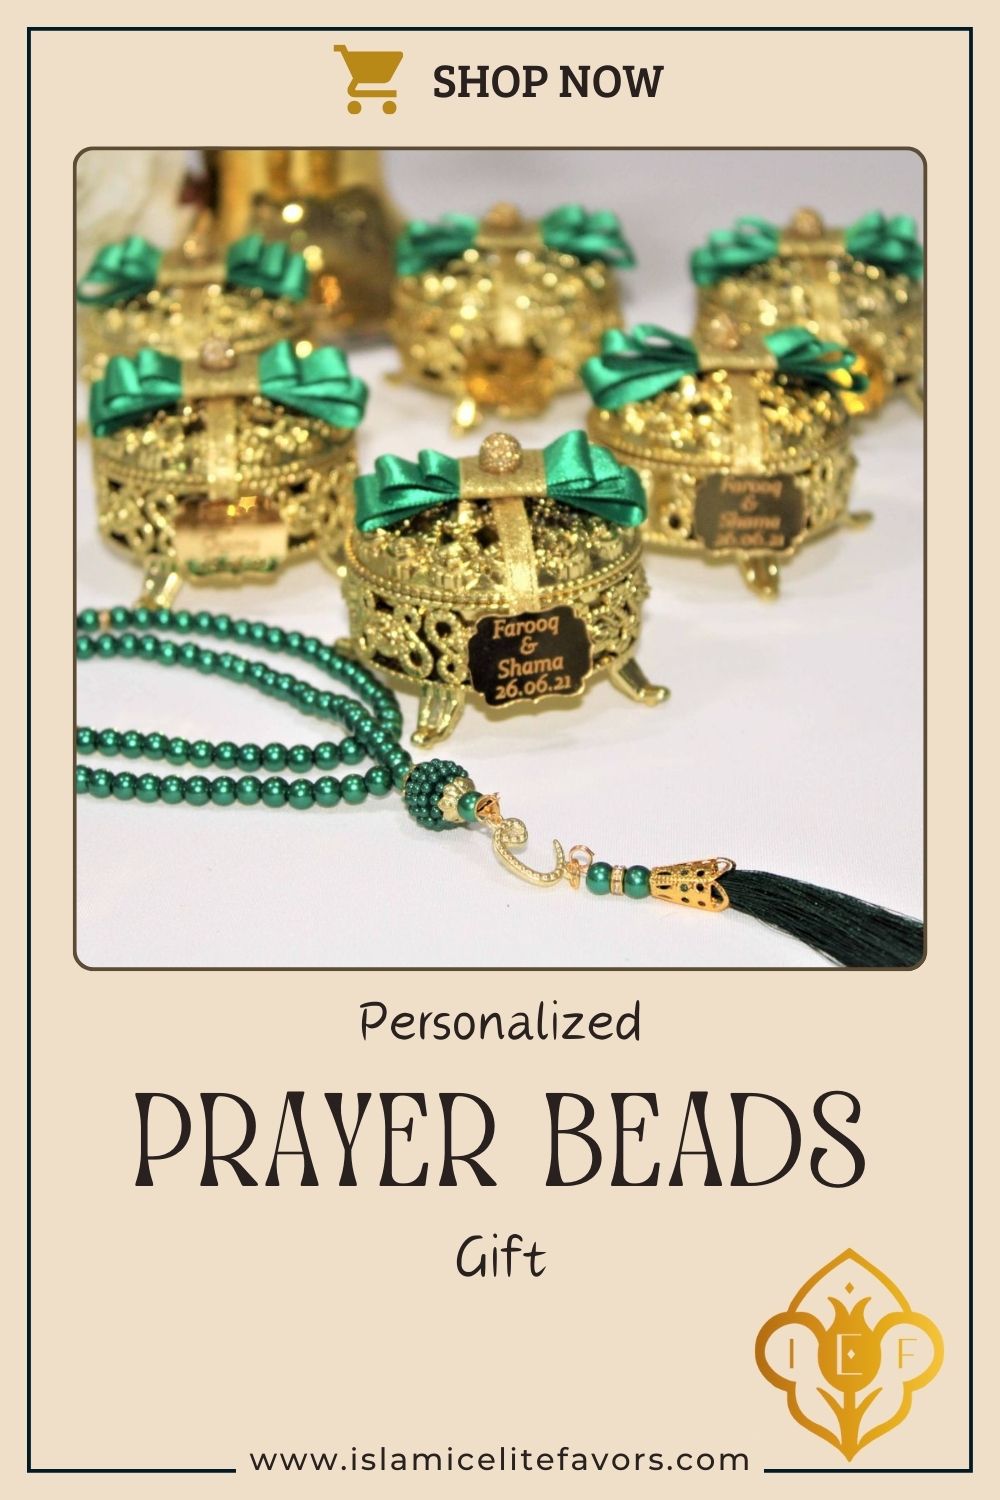 Personalized Pearl Prayer Beads Tasbeeh Luxury Gold Box Wedding Favor - Islamic Elite Favors is a handmade gift shop offering a wide variety of unique and personalized gifts for all occasions. Whether you're looking for the perfect Ramadan, Eid, Hajj, wedding gift or something special for a birthday, baby shower or anniversary, we have something for everyone. High quality, made with love.